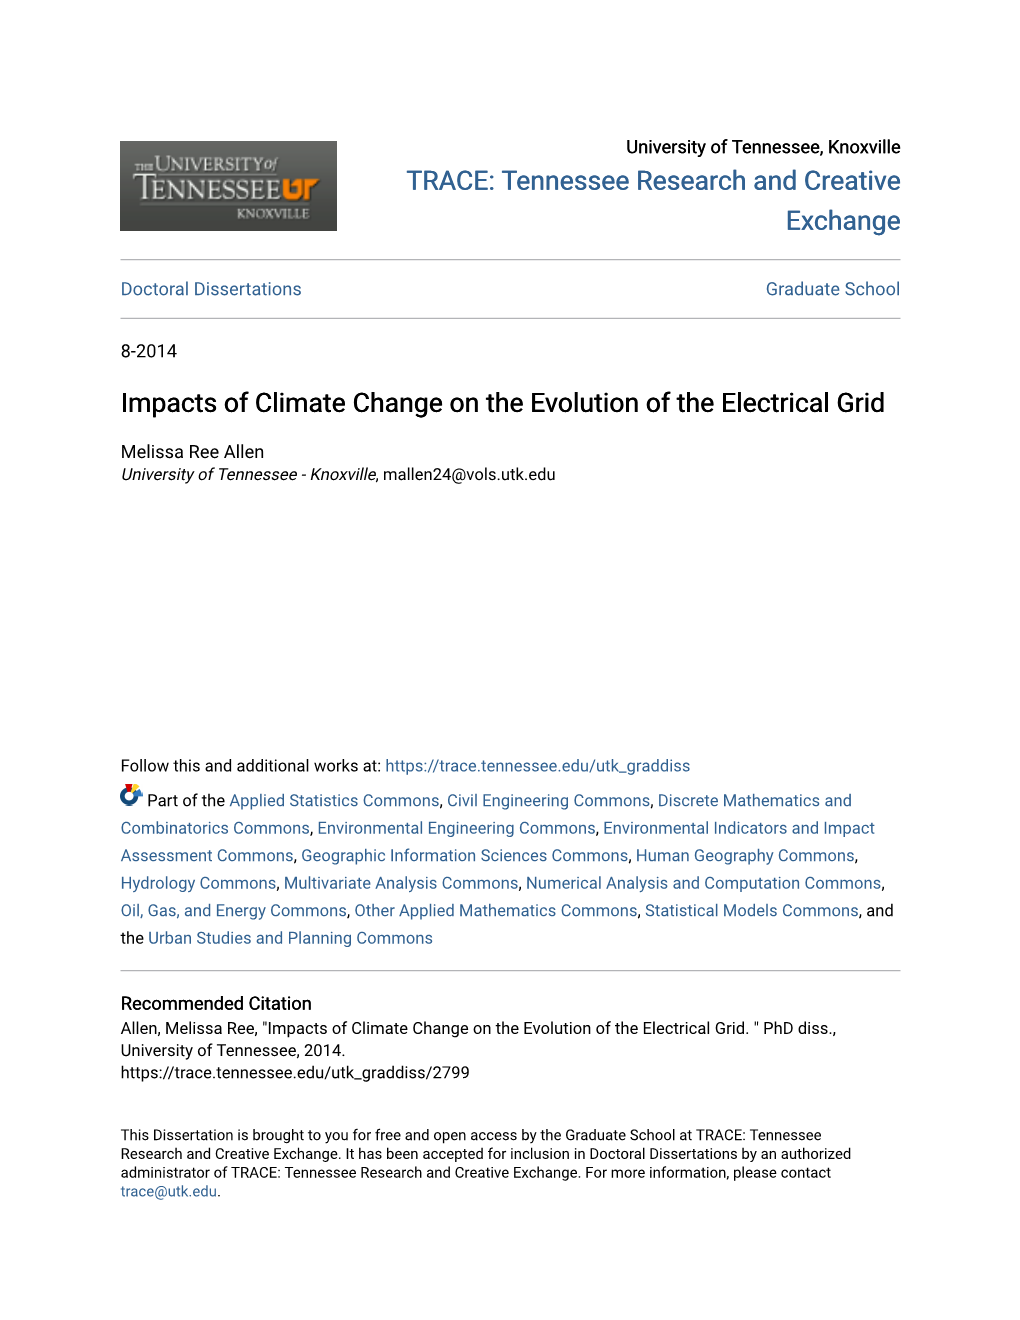 Impacts of Climate Change on the Evolution of the Electrical Grid